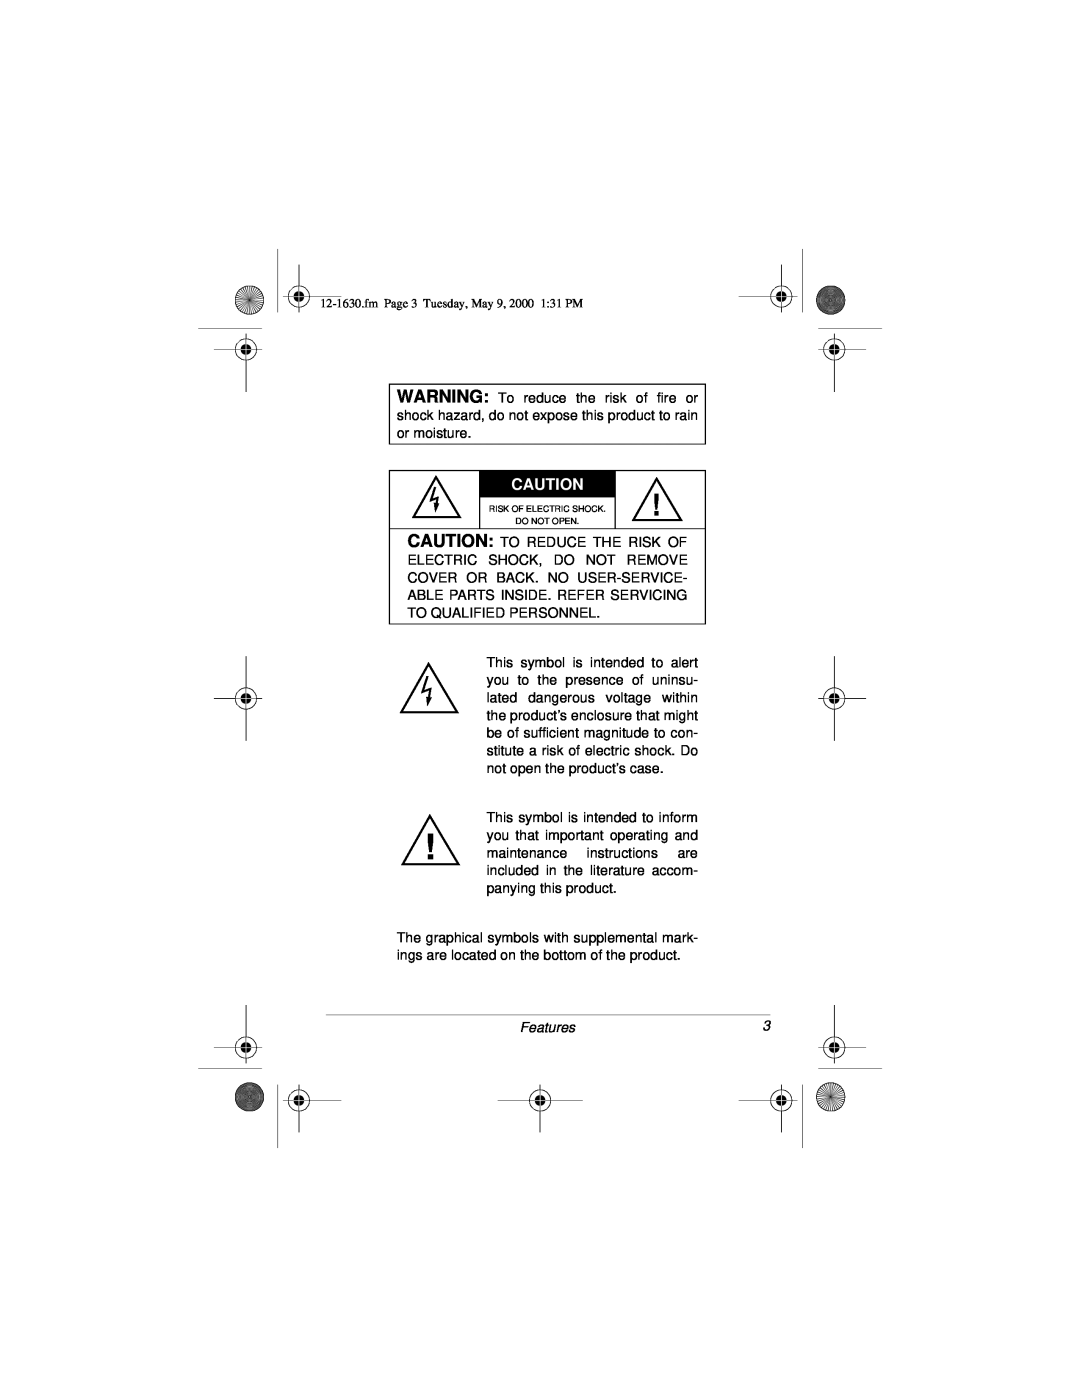 Radio Shack 12-1630 owner manual Caution To Reduce The Risk Of Electric Shock, Do Not Remove, Features 